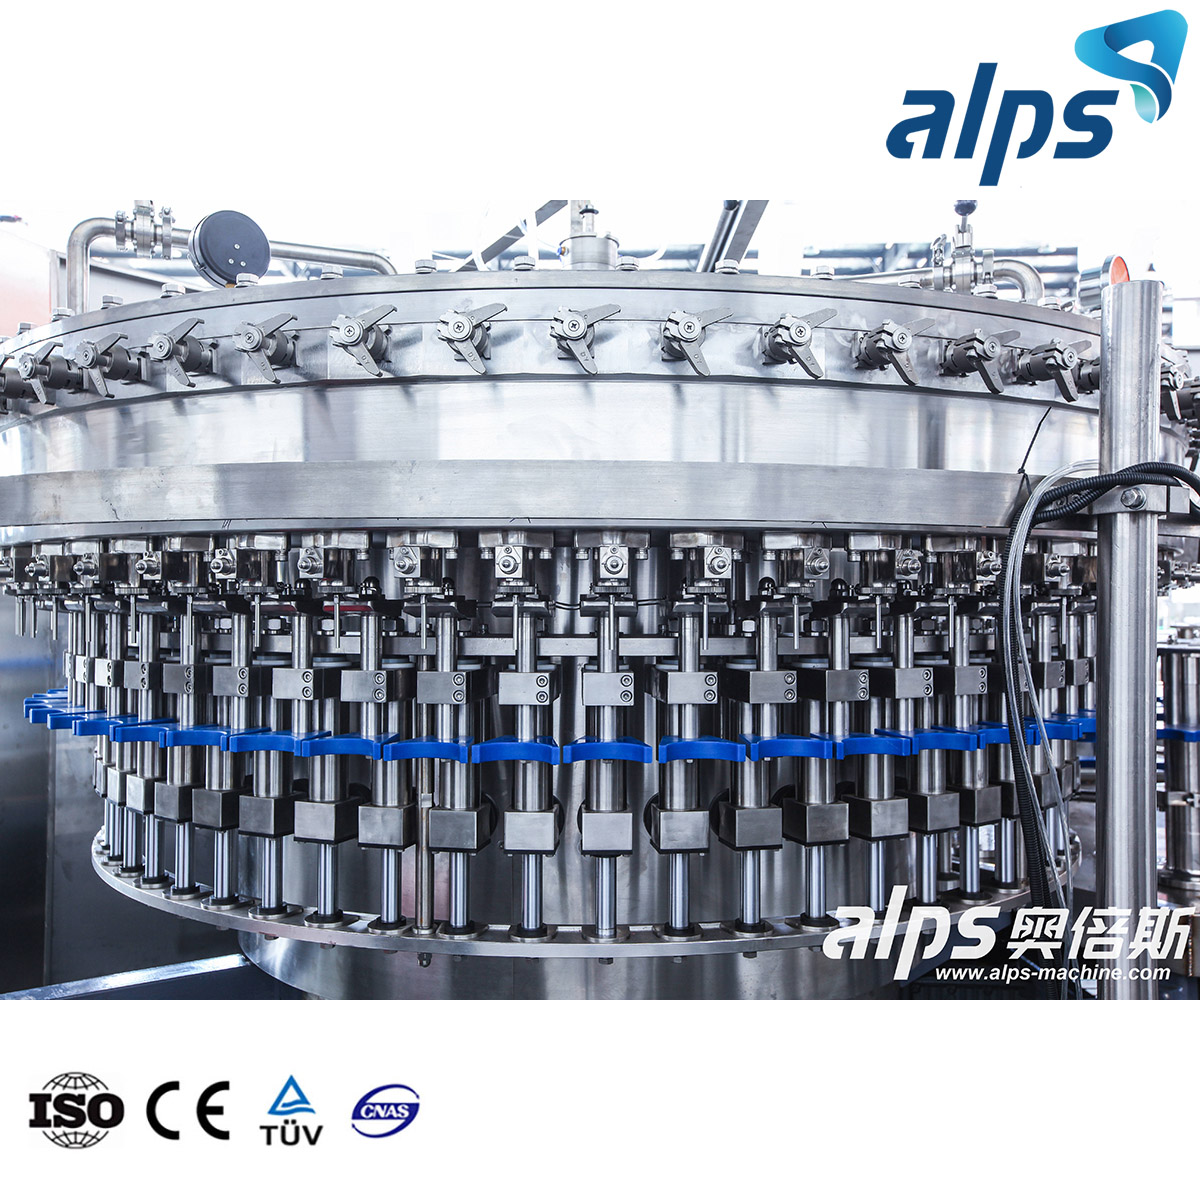 4000bph Carbonated Soft Drink CSD Washing Filling and Capping 3 in 1 Machine 